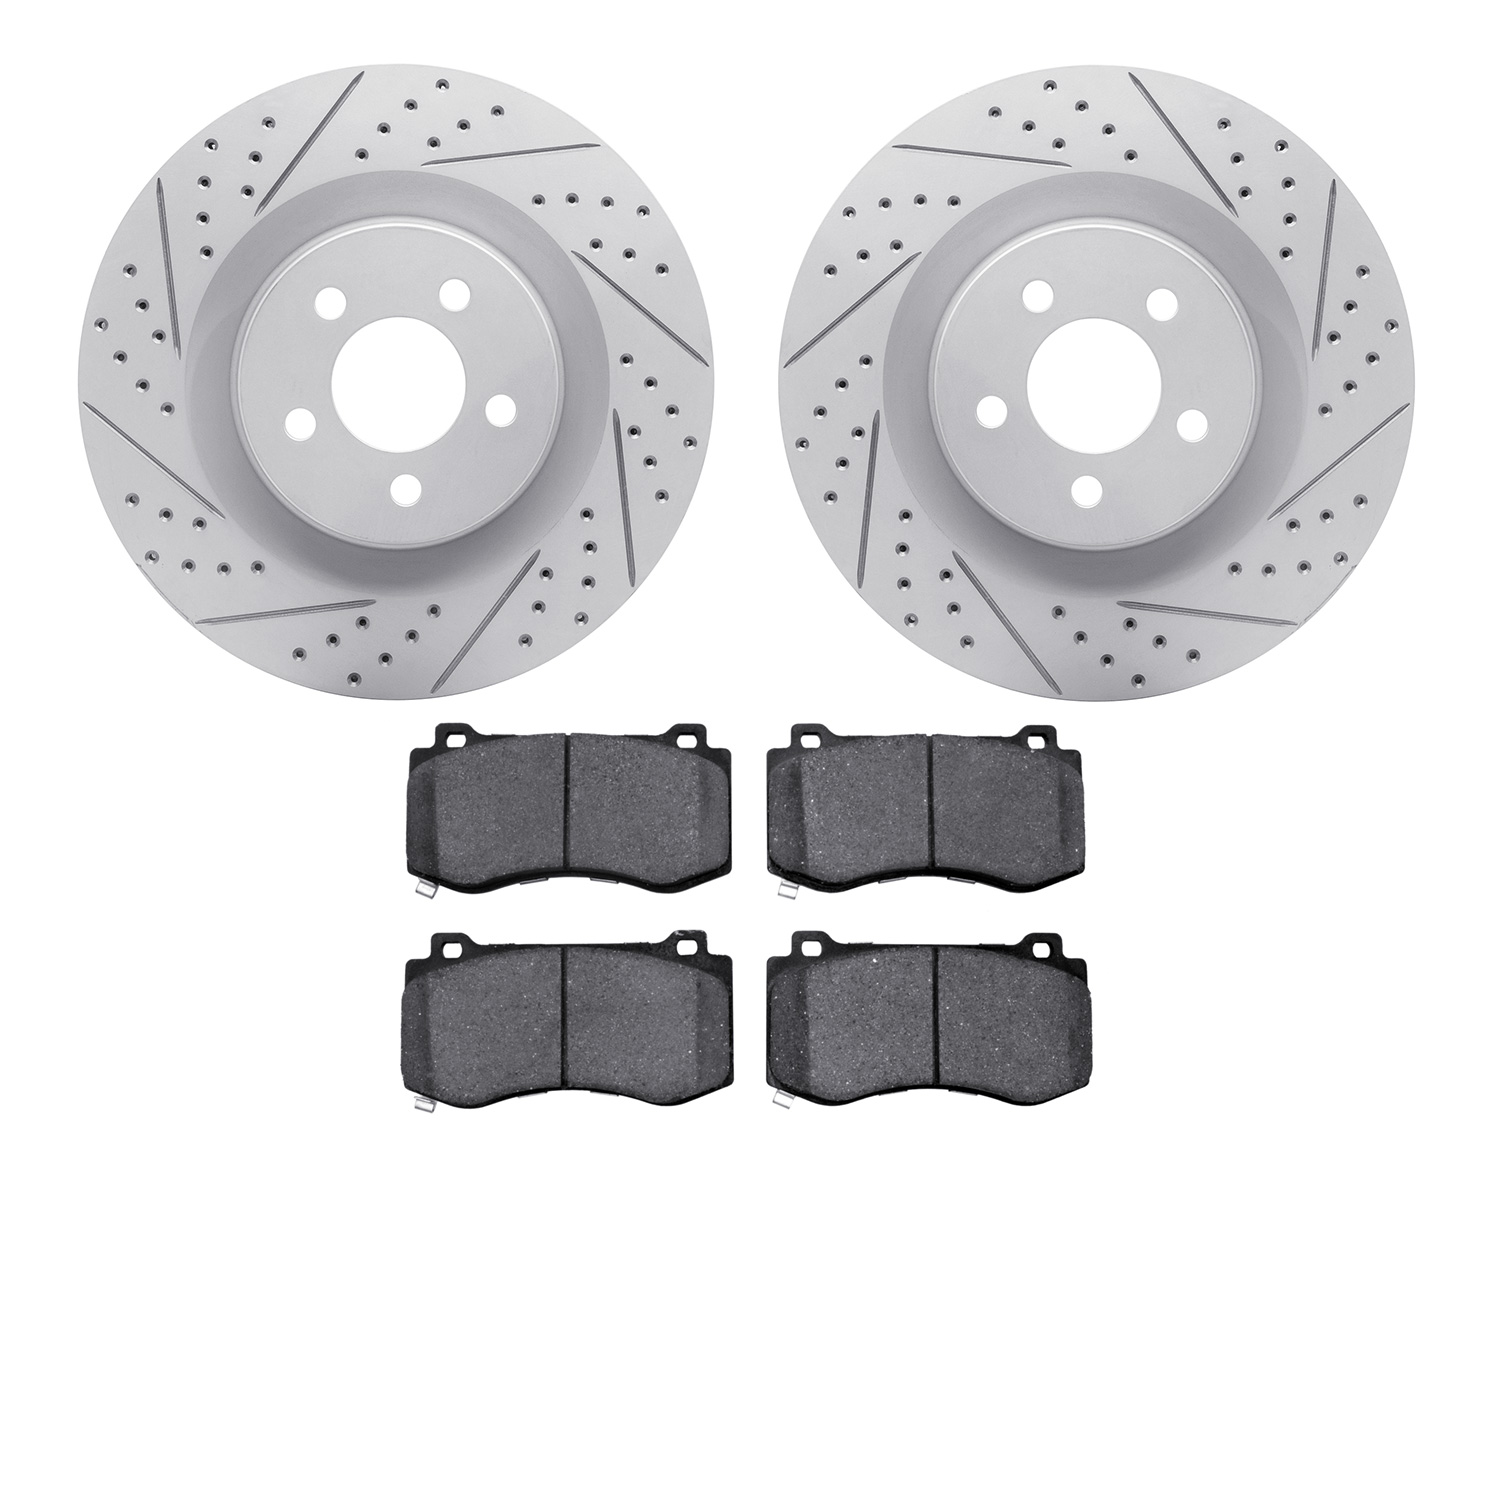 2502-39015 Geoperformance Drilled/Slotted Rotors w/5000 Advanced Brake Pads Kit, Fits Select Mopar, Position: Front